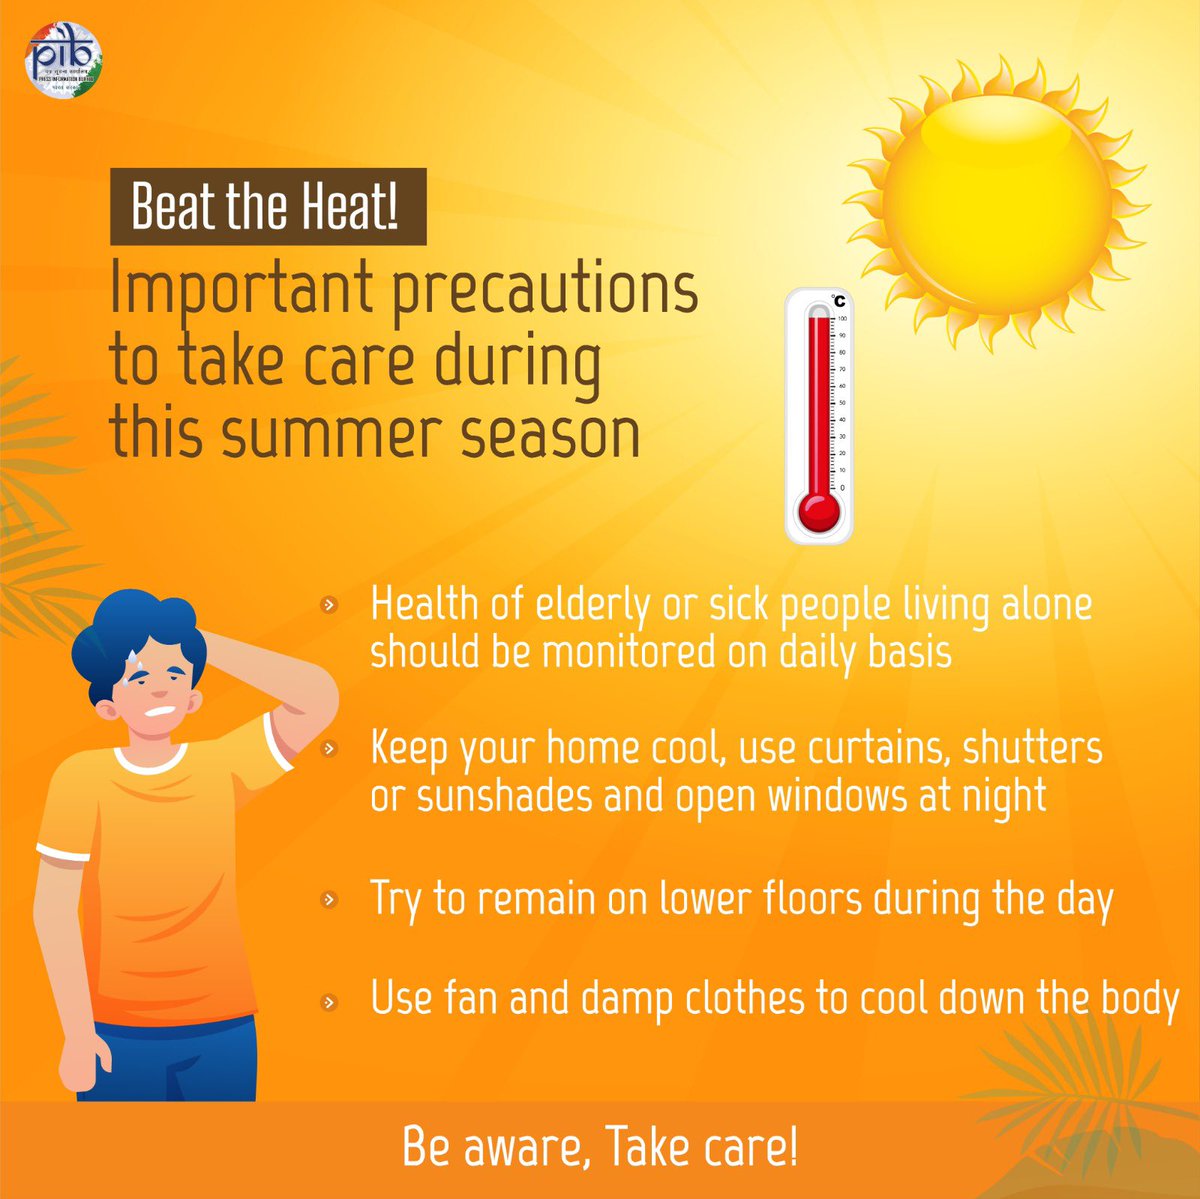 Beat the Heat! Important precautions to take care of during this summer season!👇 #BeatTheHeat #HeatWave